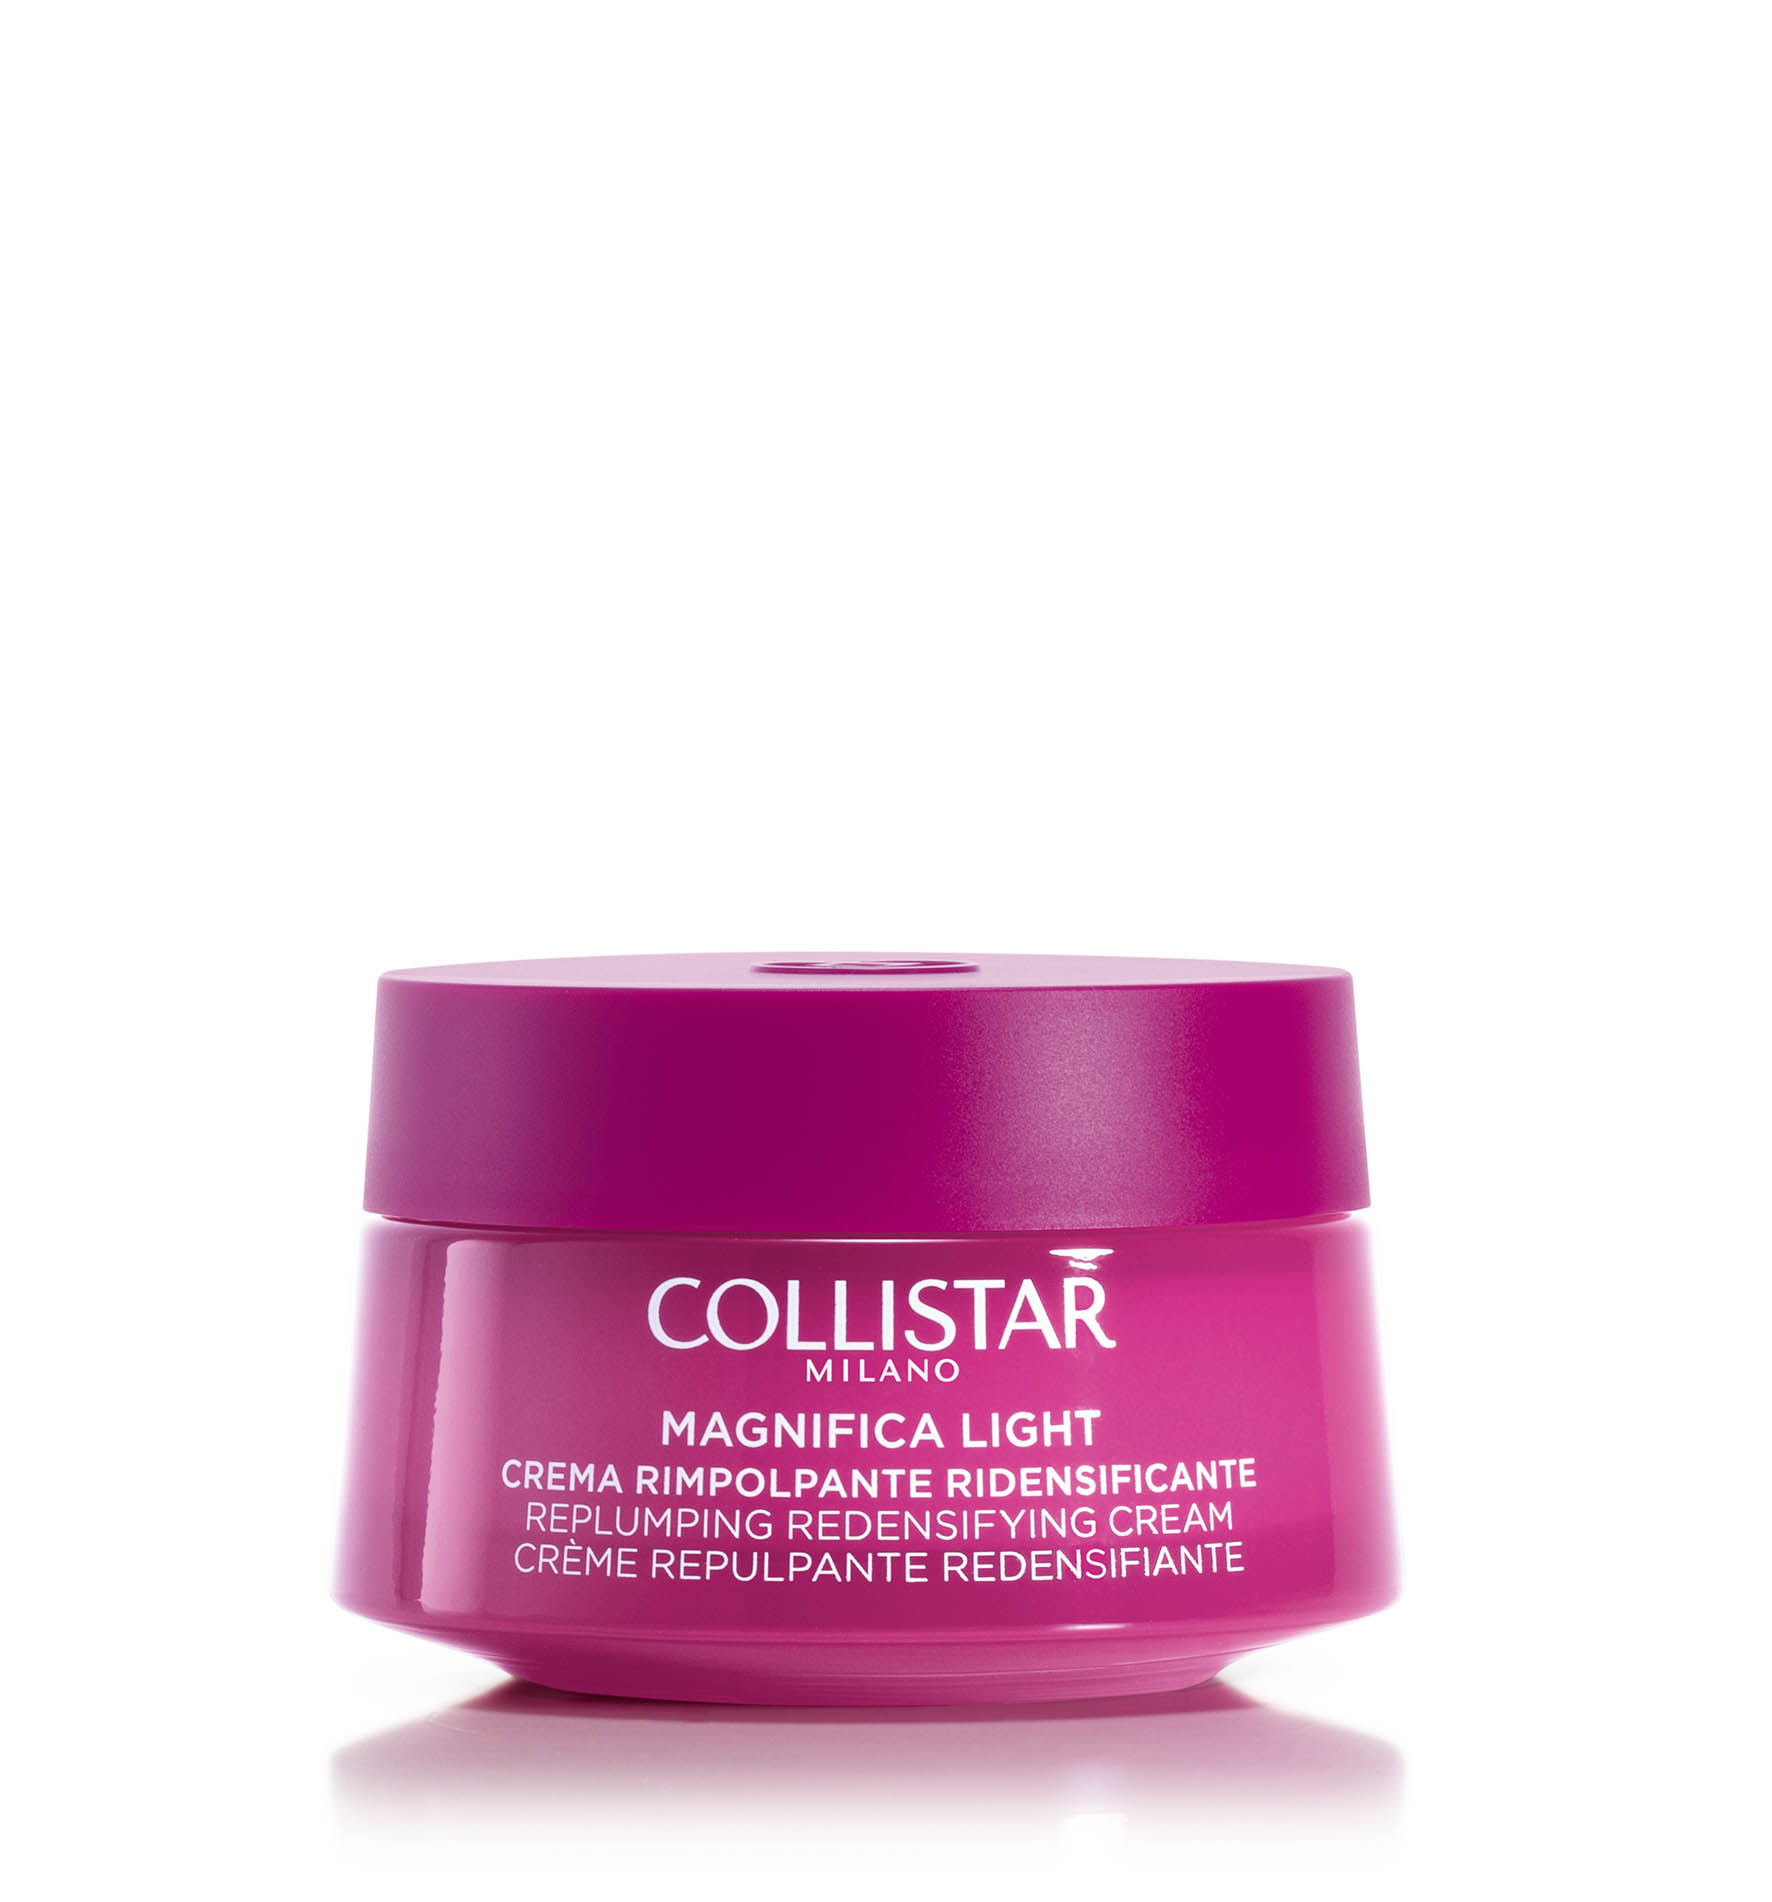 MAGNIFICA LIGHT REPLUMPING REDENSIFYING CREAM FACE AND NECK - Loss of tone and compactness | Collistar - Shop Online Ufficiale